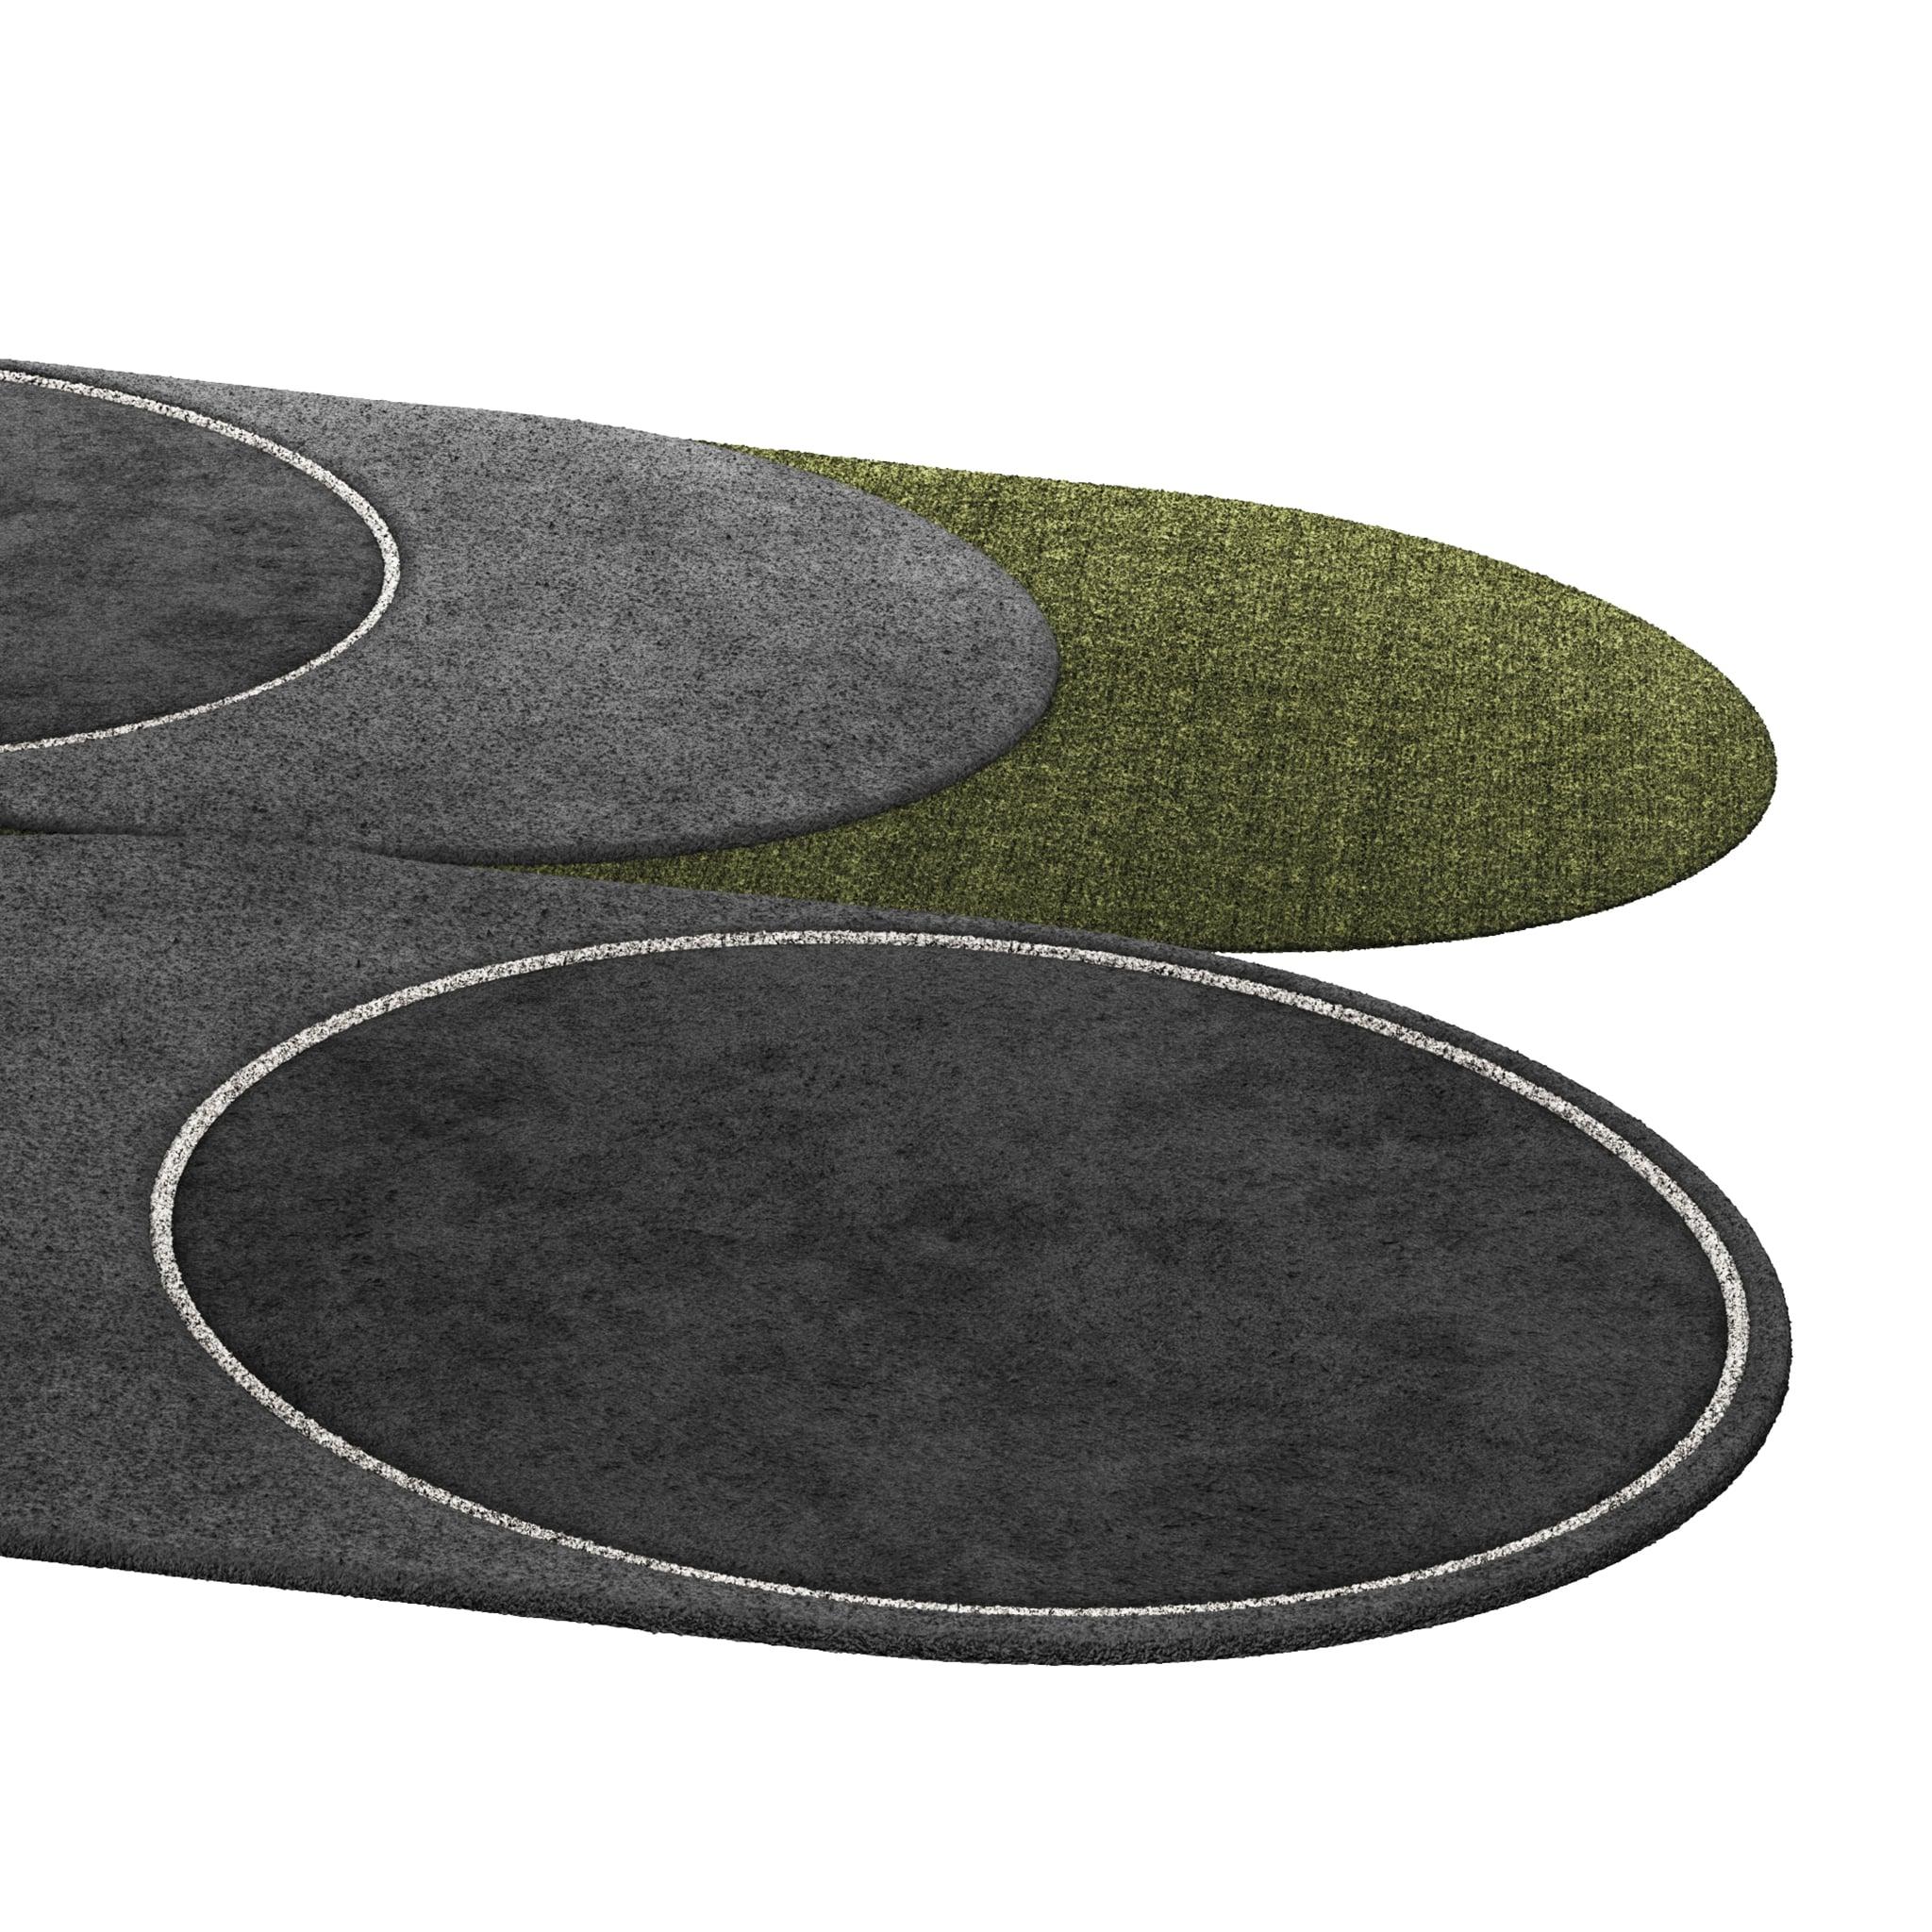 Tapis Retro #013 is a retro rug with an irregular shape and timeless colors. Inspired by architectural lines, this geometric rug makes a statement in any living space. 

Using a 3D-tufted technique that combines cut and loop pile, the retro rug in